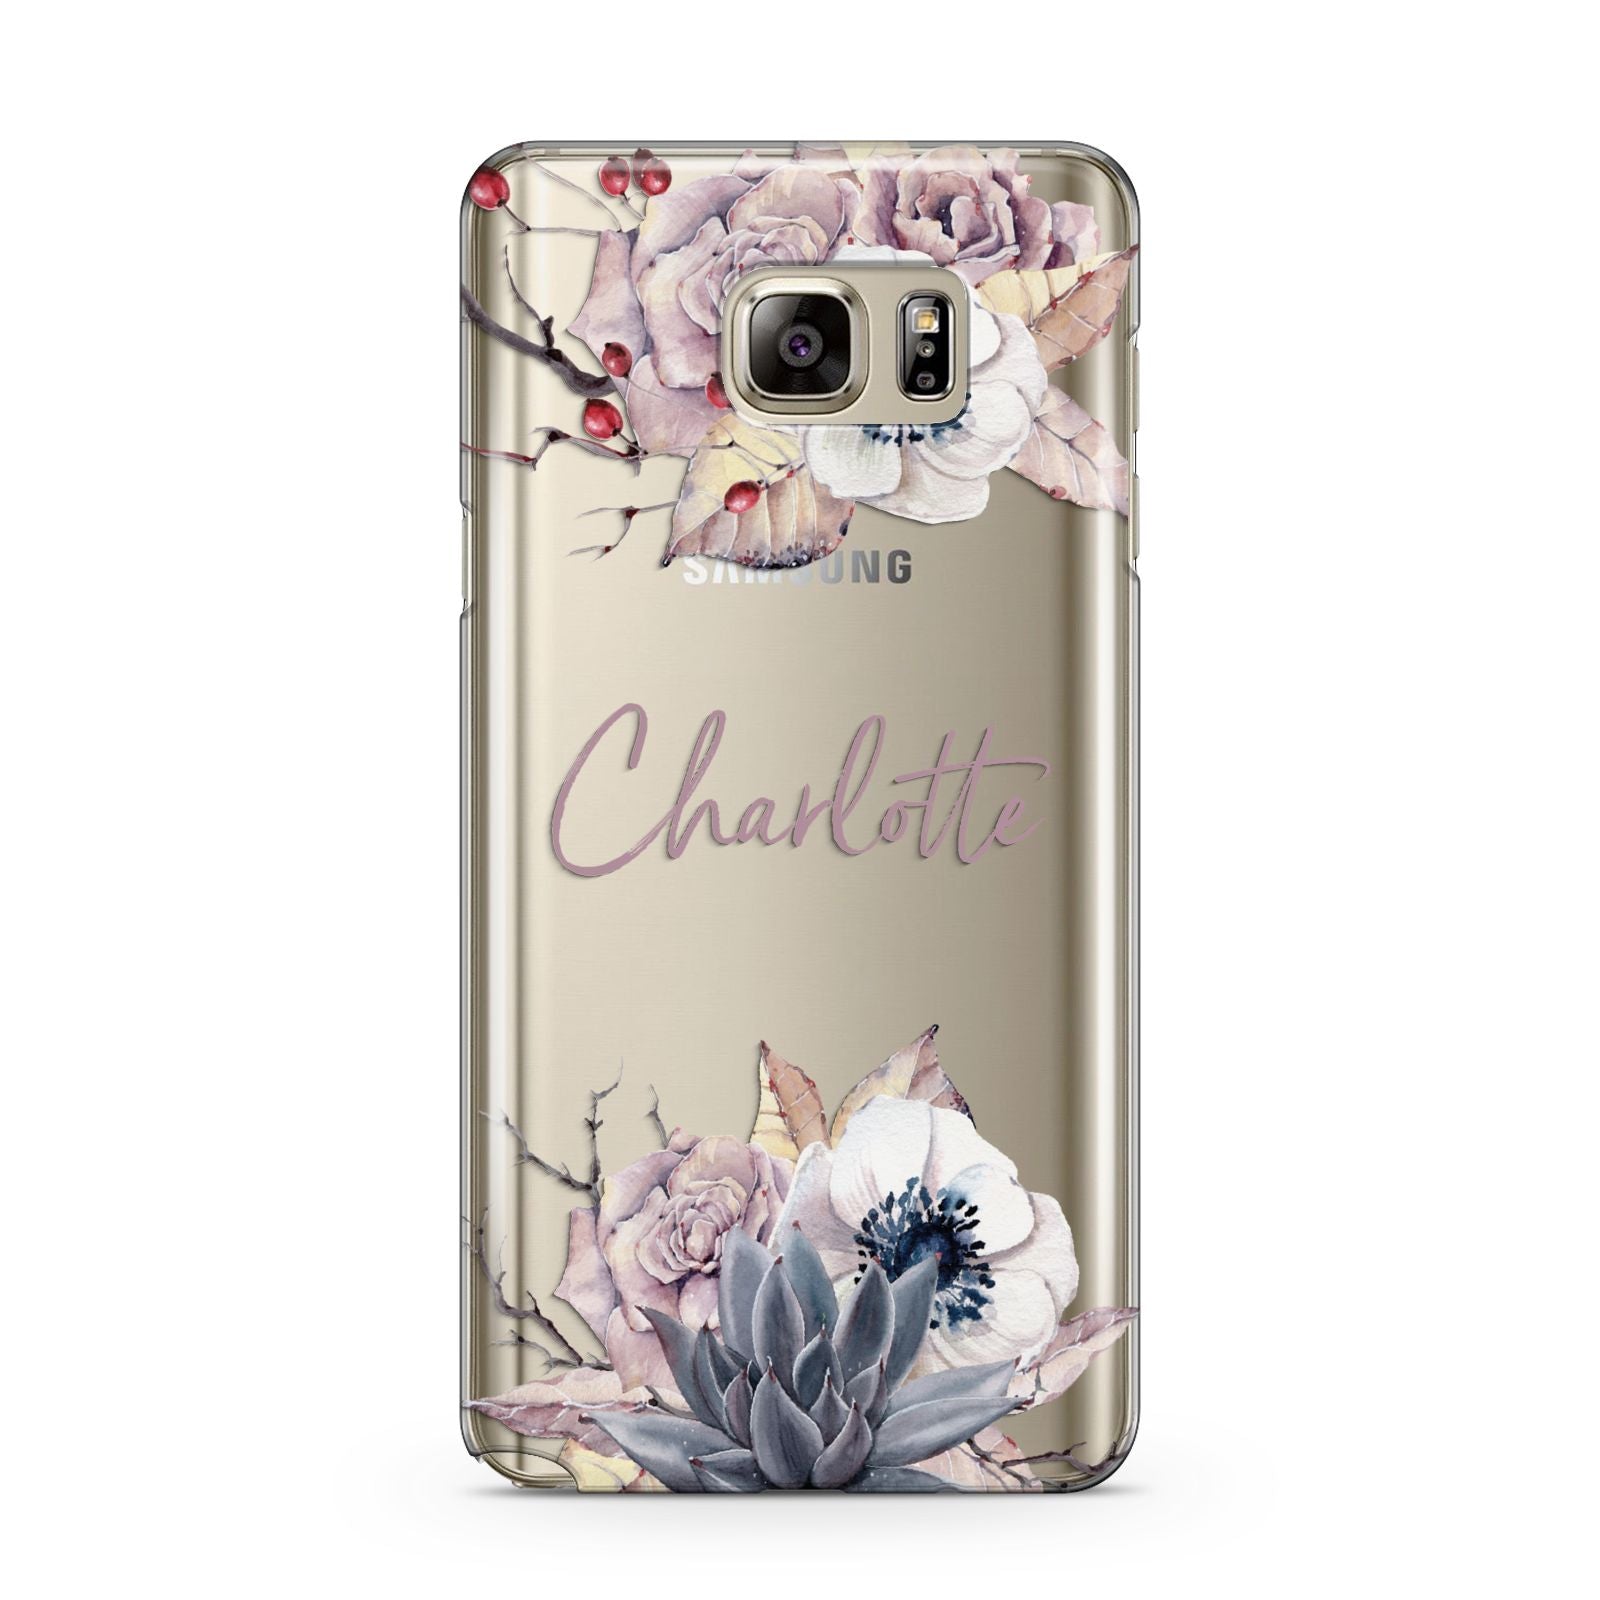 Personalised Autumn Floral Samsung Galaxy Note 5 Case